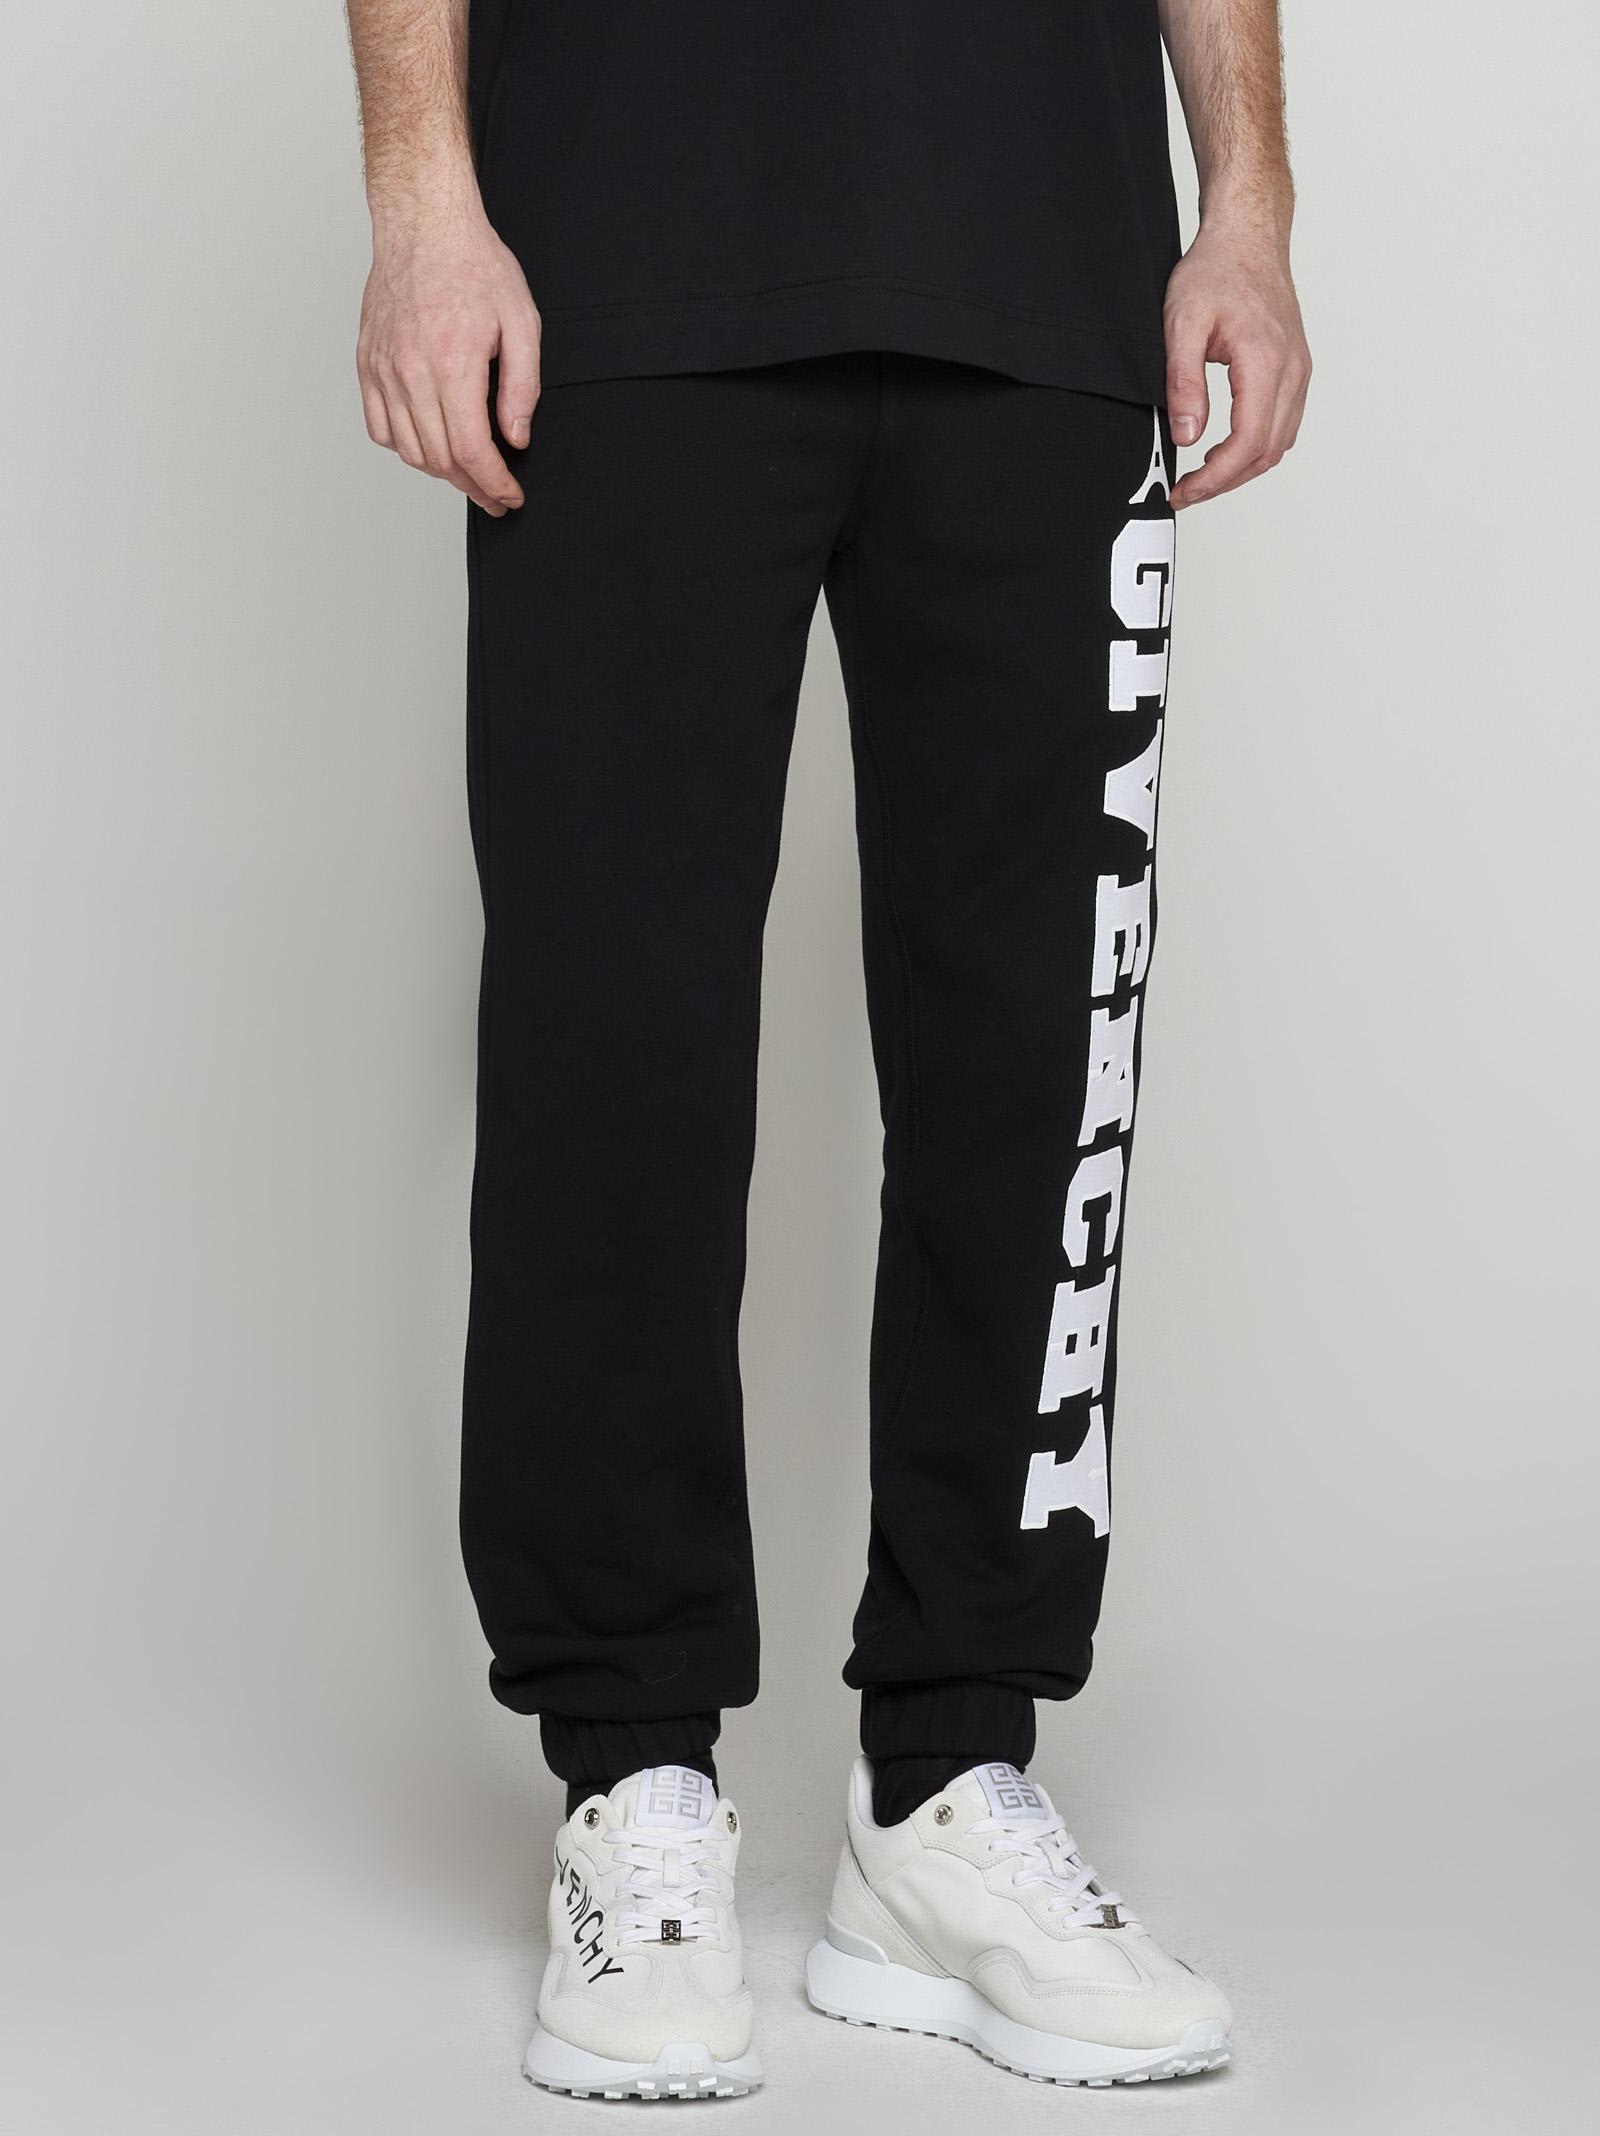 Givenchy Sweat Sweatpants for Men